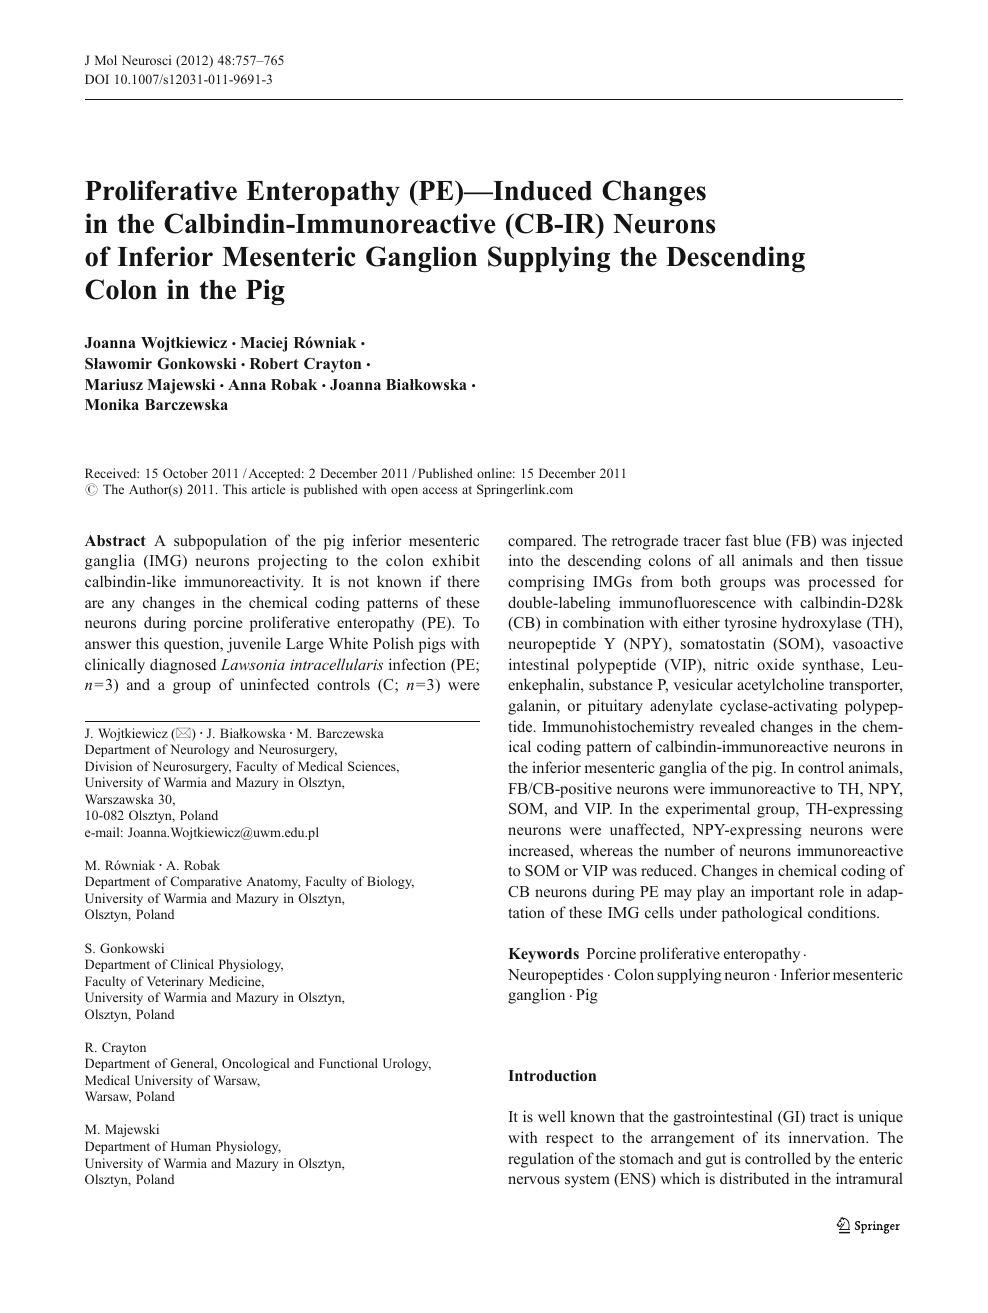 Proliferative Enteropathy Pe Induced Changes In The Calbindin Immunoreactive Cb Ir Neurons Of Inferior Mesenteric Ganglion Supplying The Descending Colon In The Pig Topic Of Research Paper In Veterinary Science Download Scholarly Article Pdf